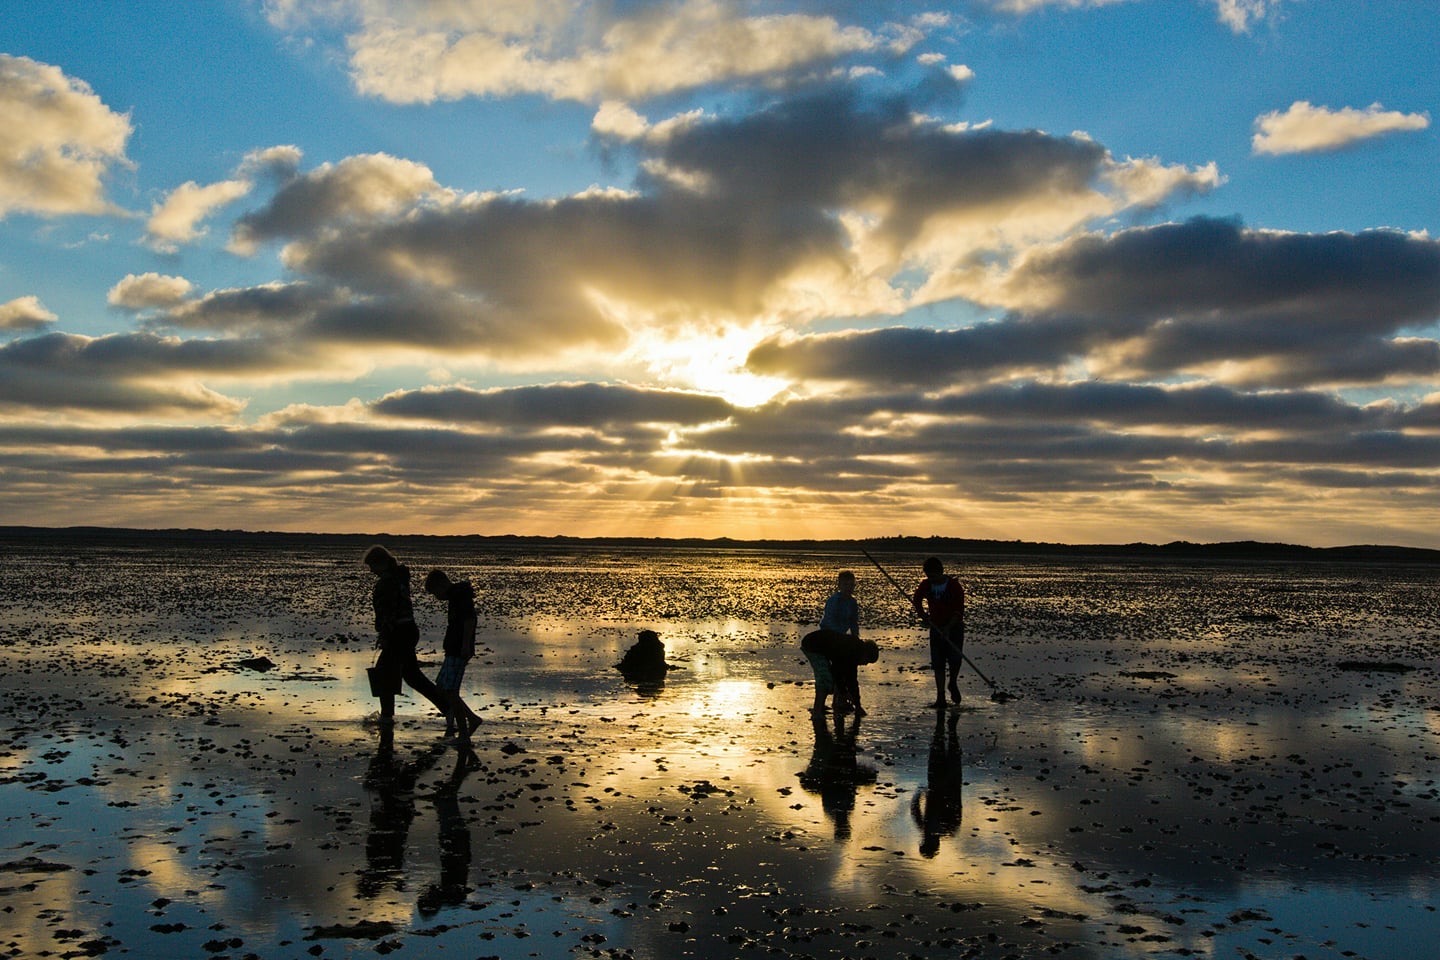 Searching for cockles on a sandbank in the Wadden Sea